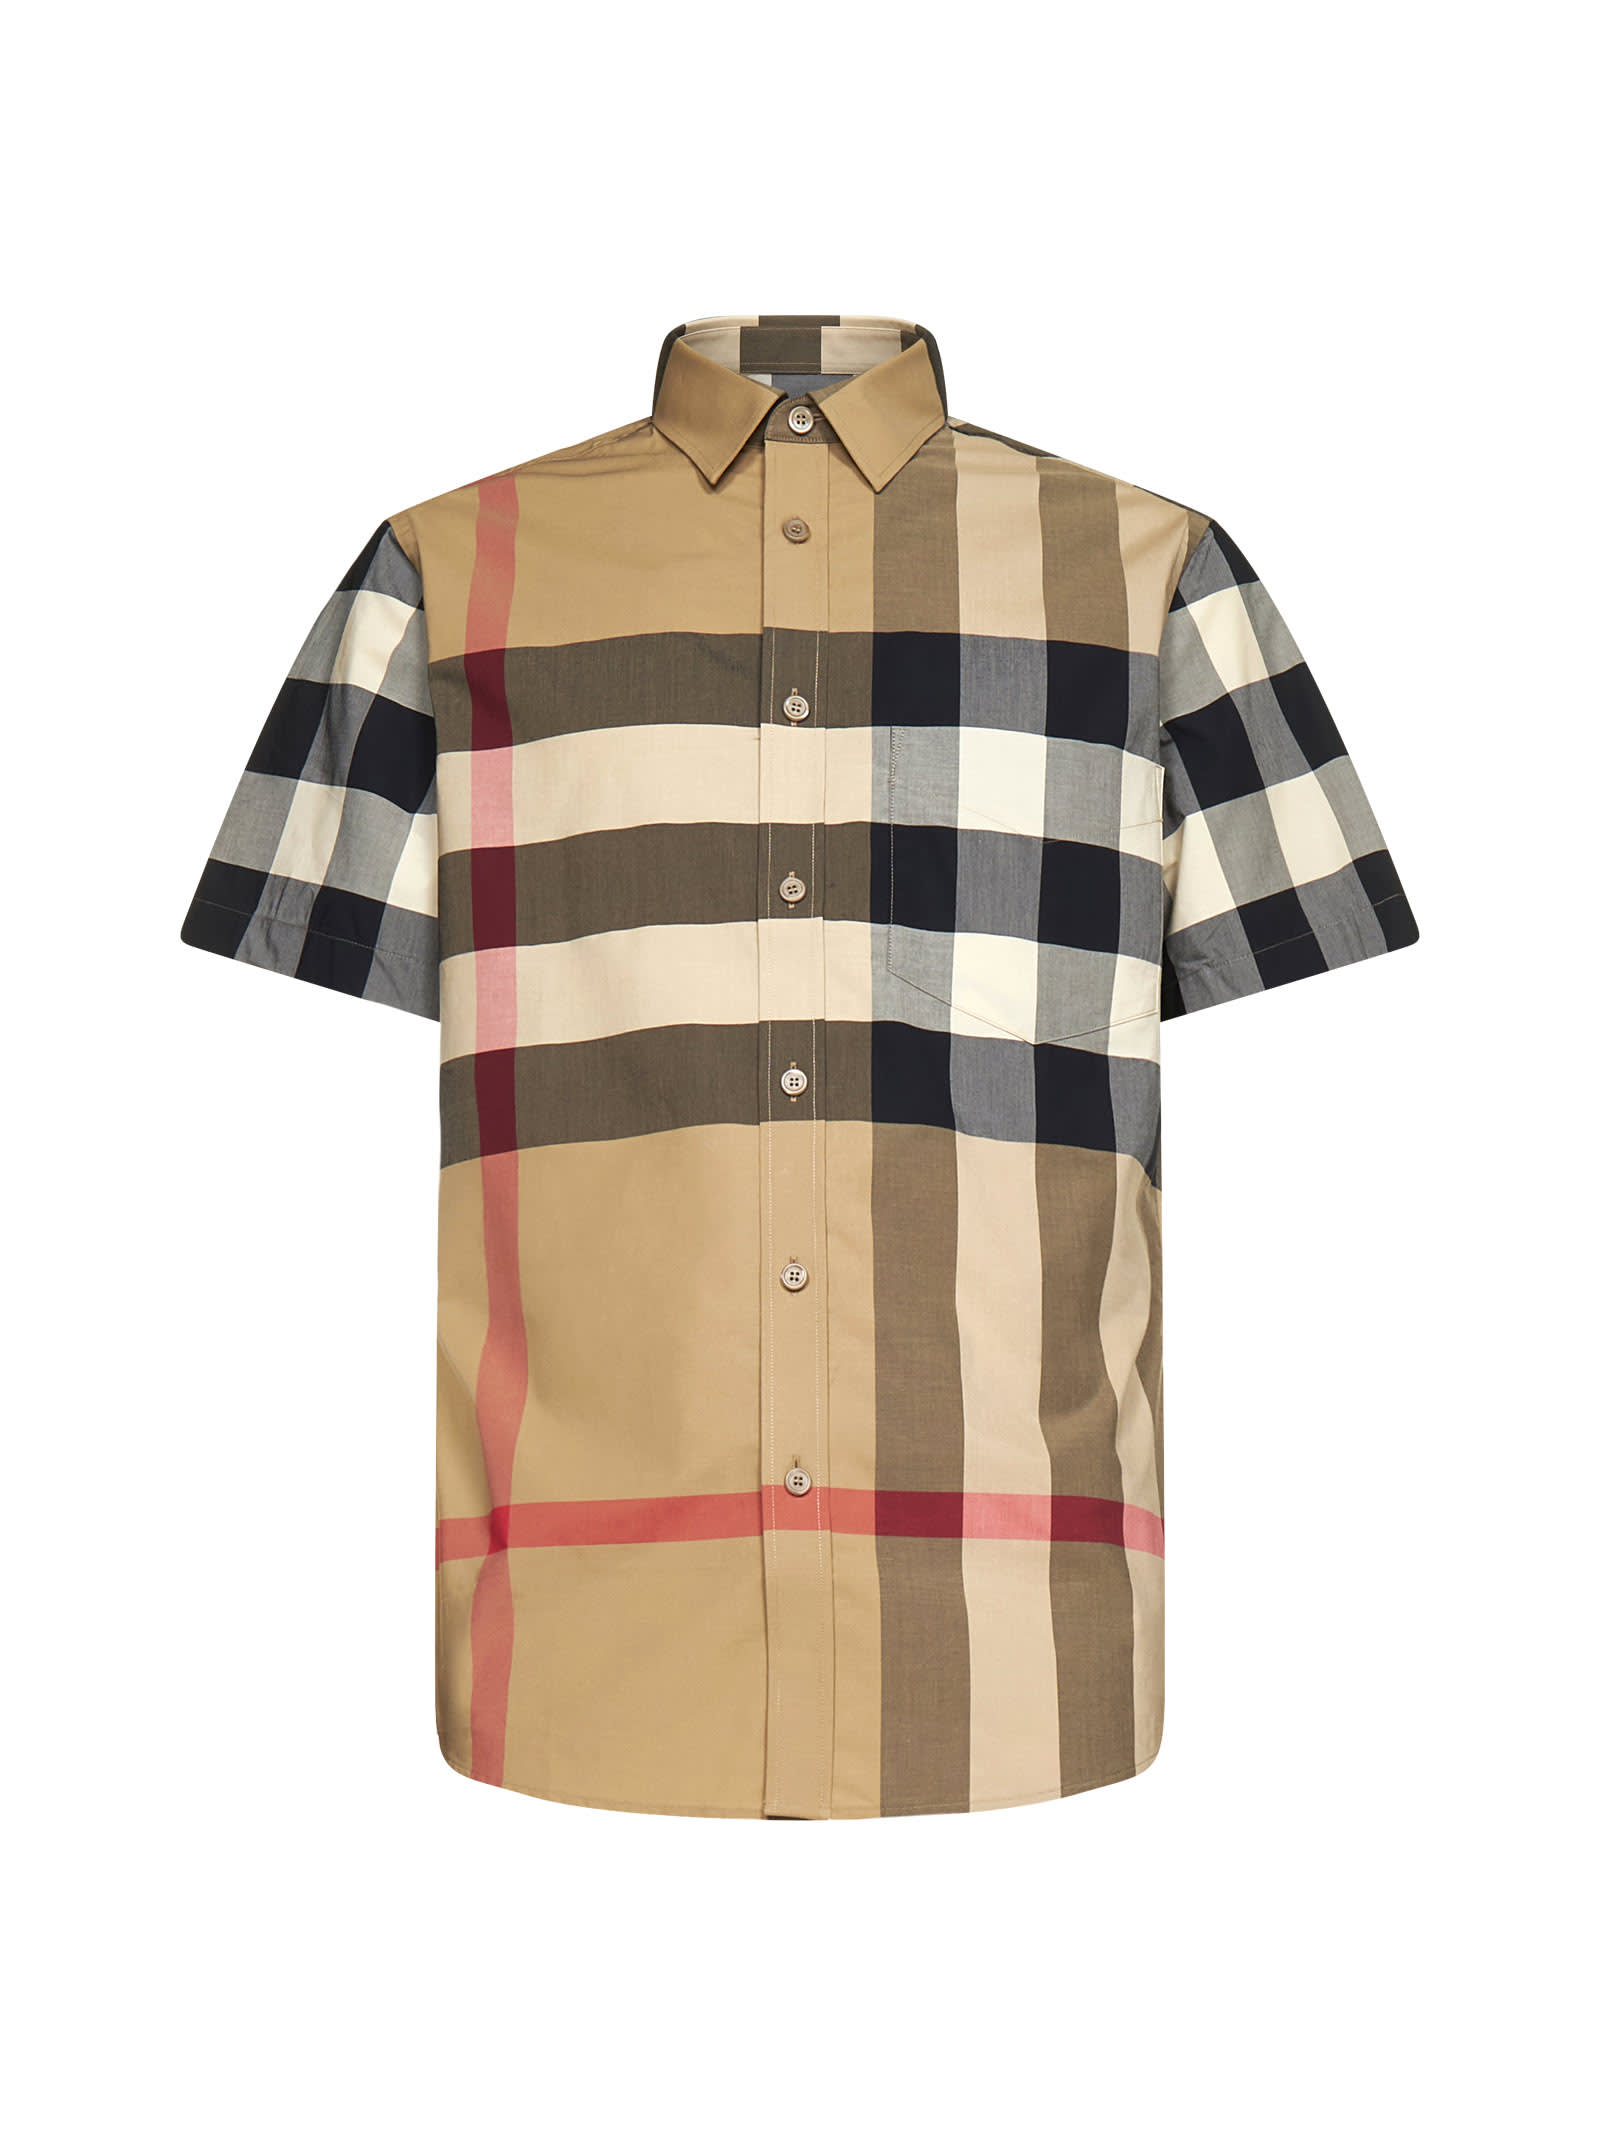 Burberry Shirt In Archive Beige Ip Check | ModeSens